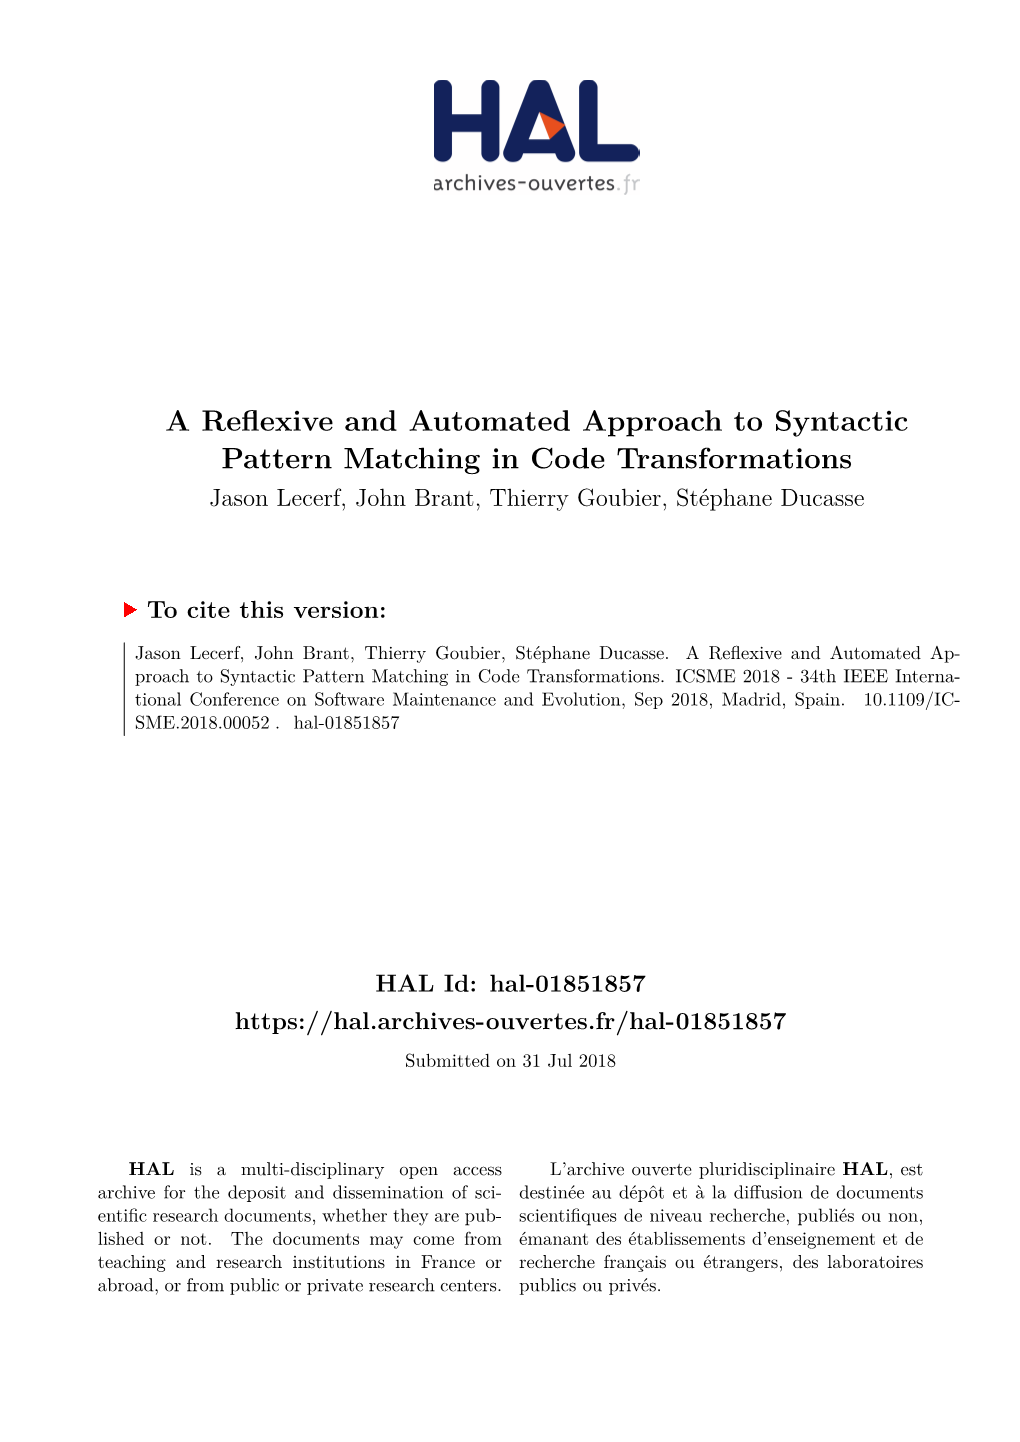 A Reflexive and Automated Approach to Syntactic Pattern Matching in Code Transformations Jason Lecerf, John Brant, Thierry Goubier, Stéphane Ducasse